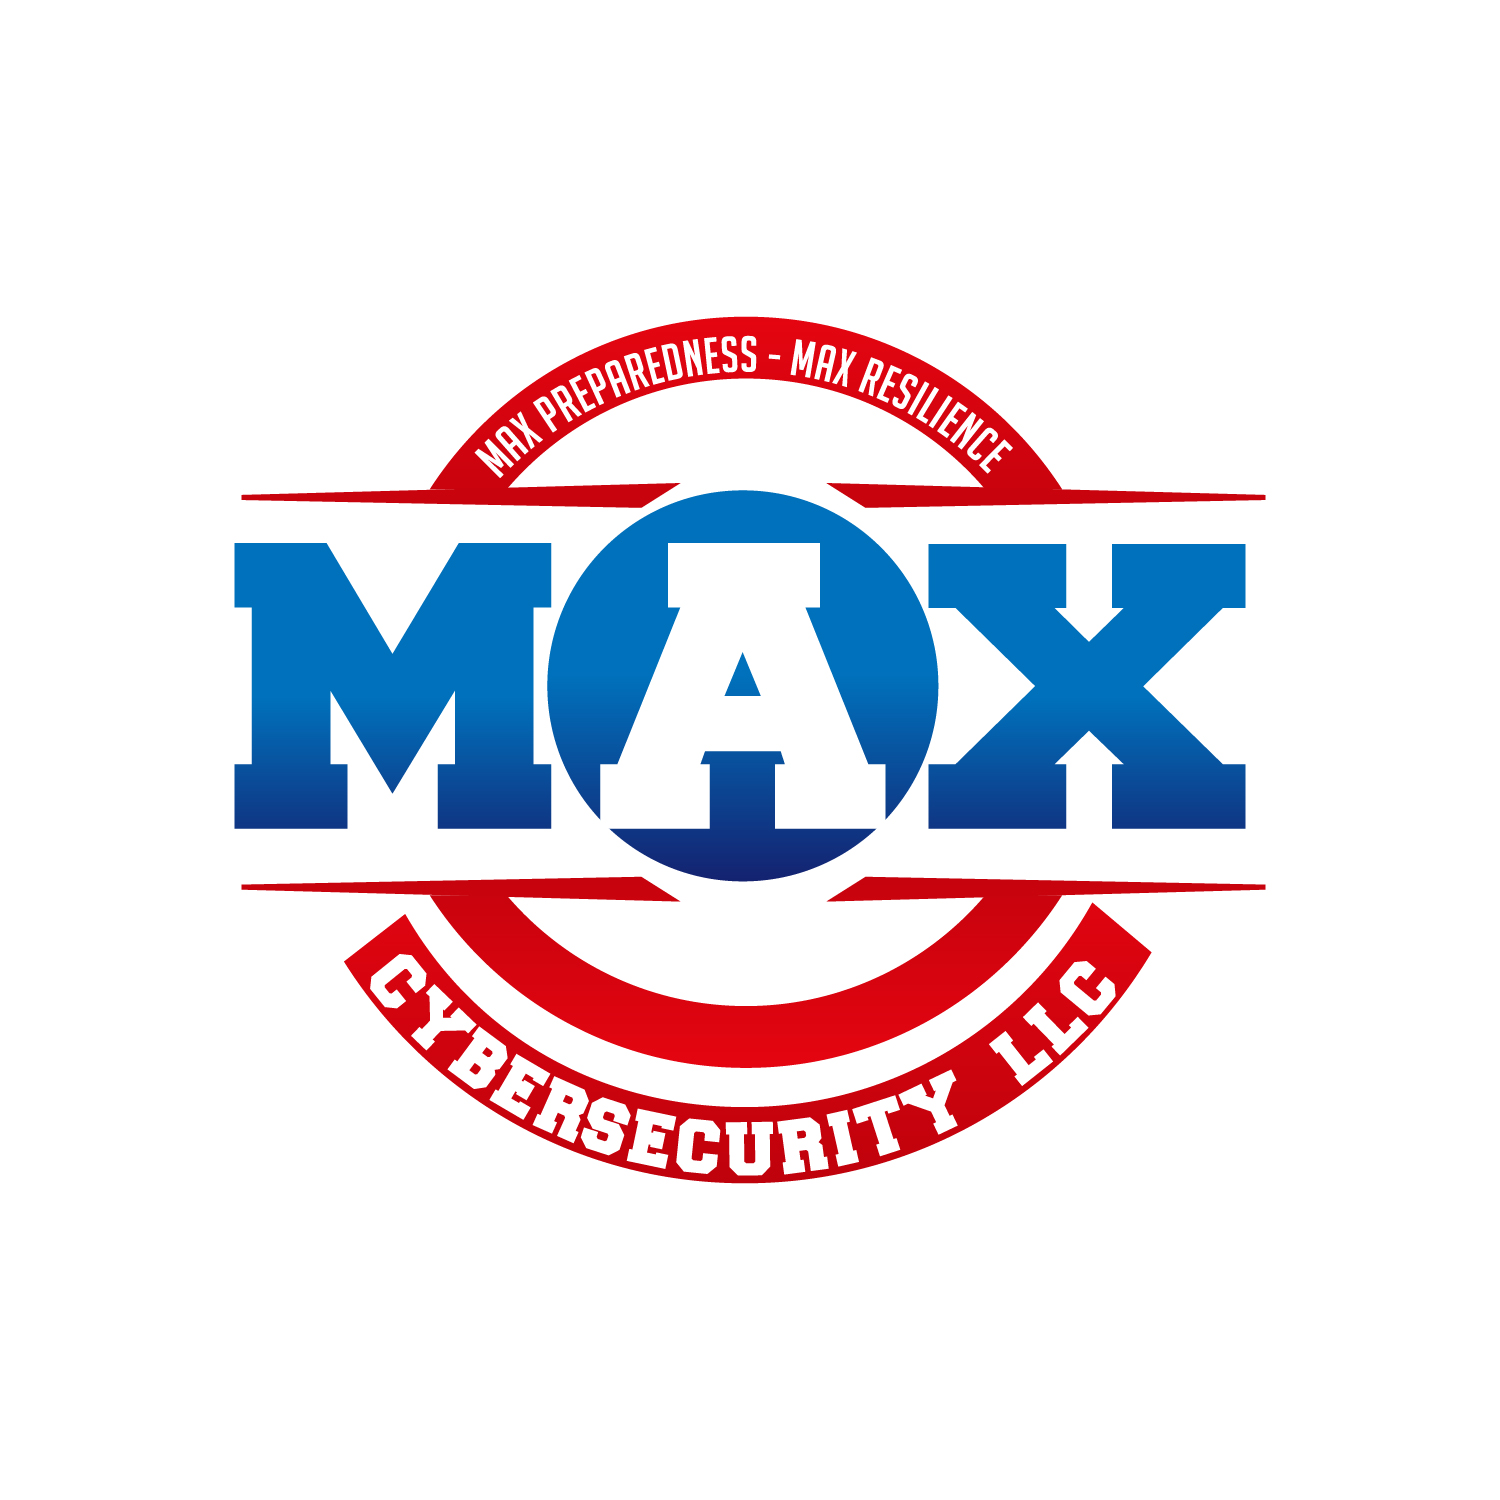 MAX CYBERSECURITY National Security and Emergency Preparedness Professionals